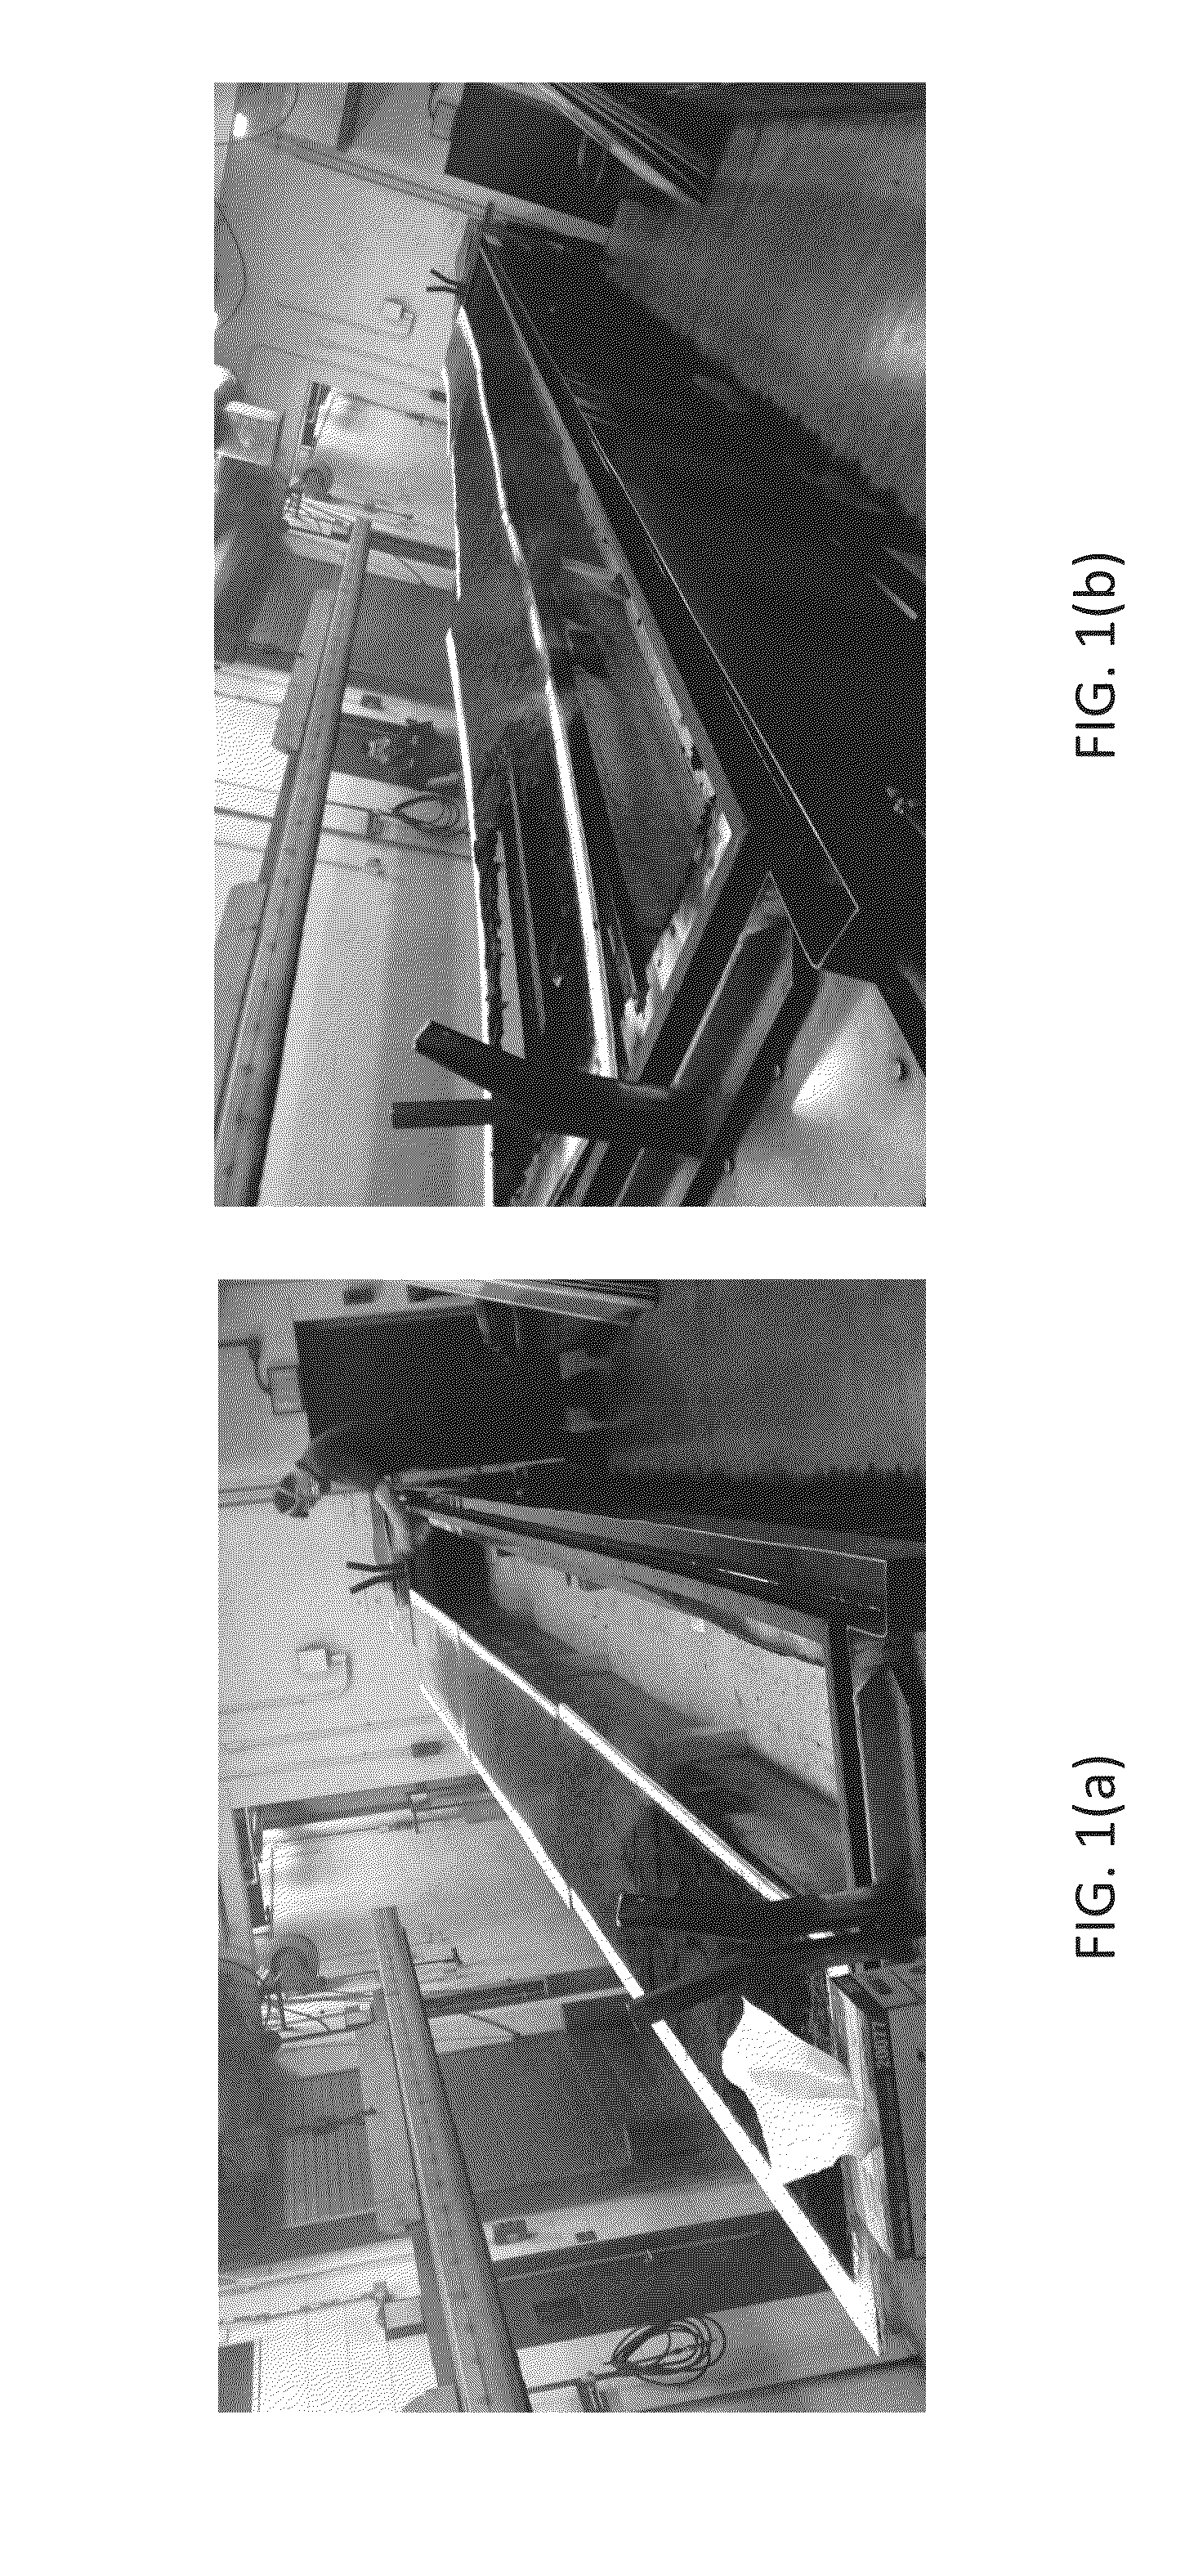 Methods of conferring fire retardancy to wood and fire-retardant wood products